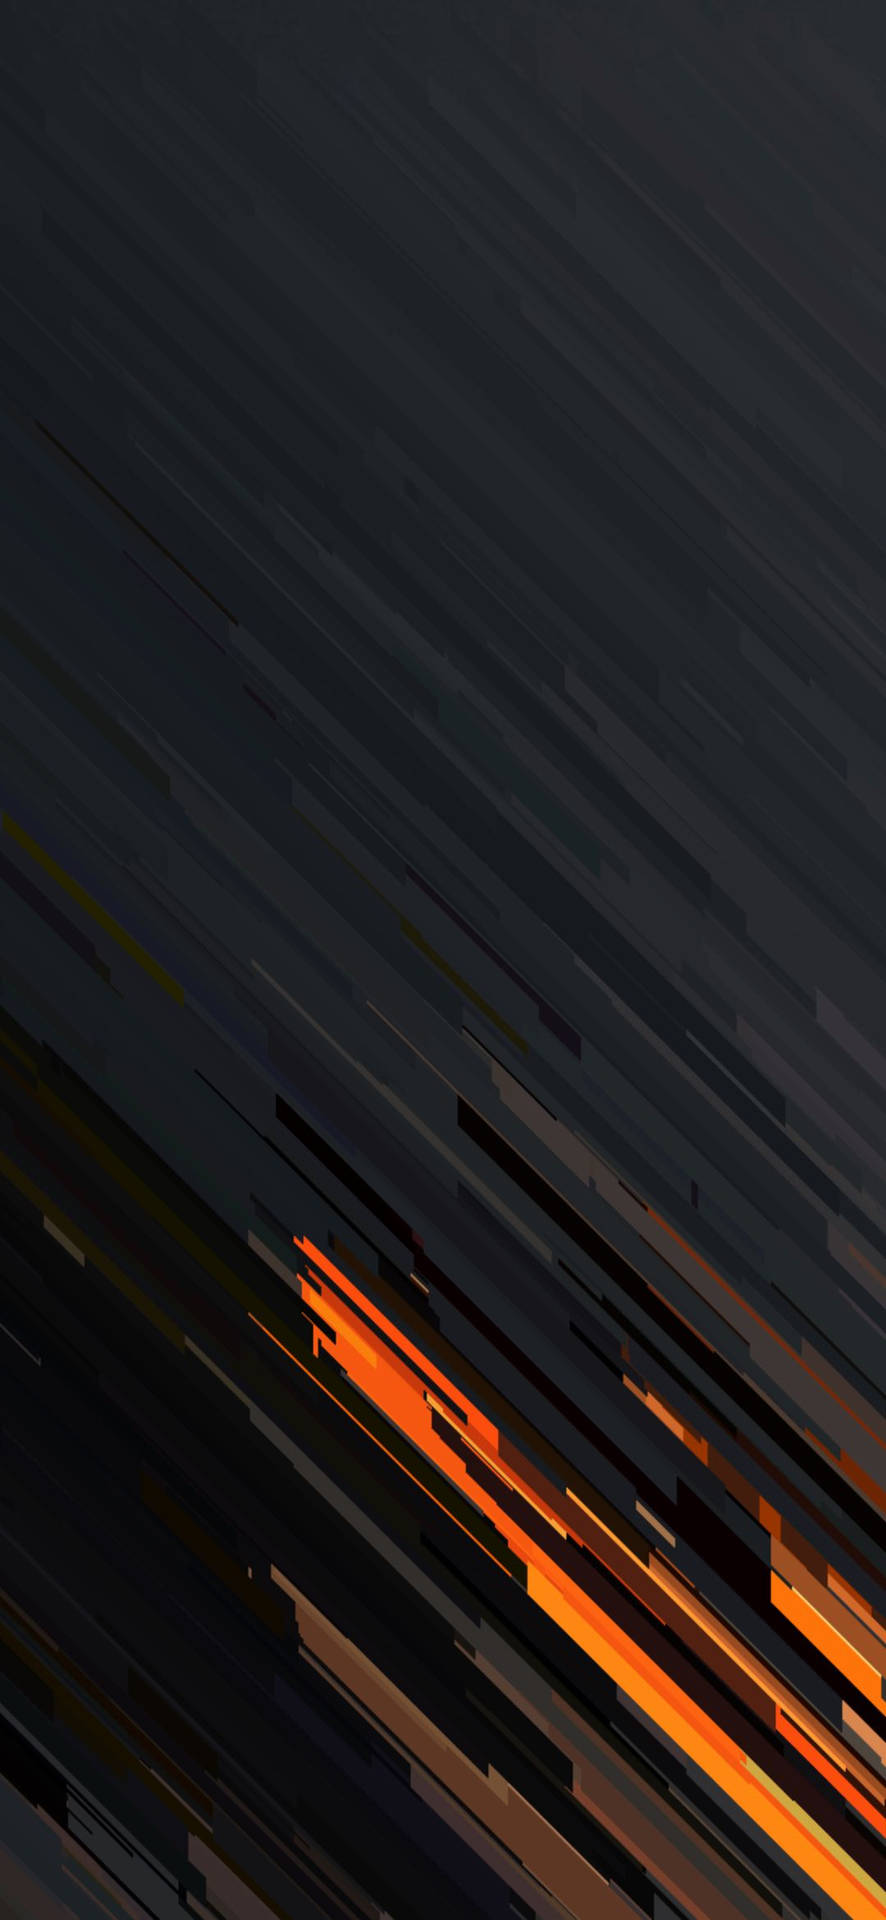 Abstract Orange And Dark Lines Smartphone Background Wallpaper